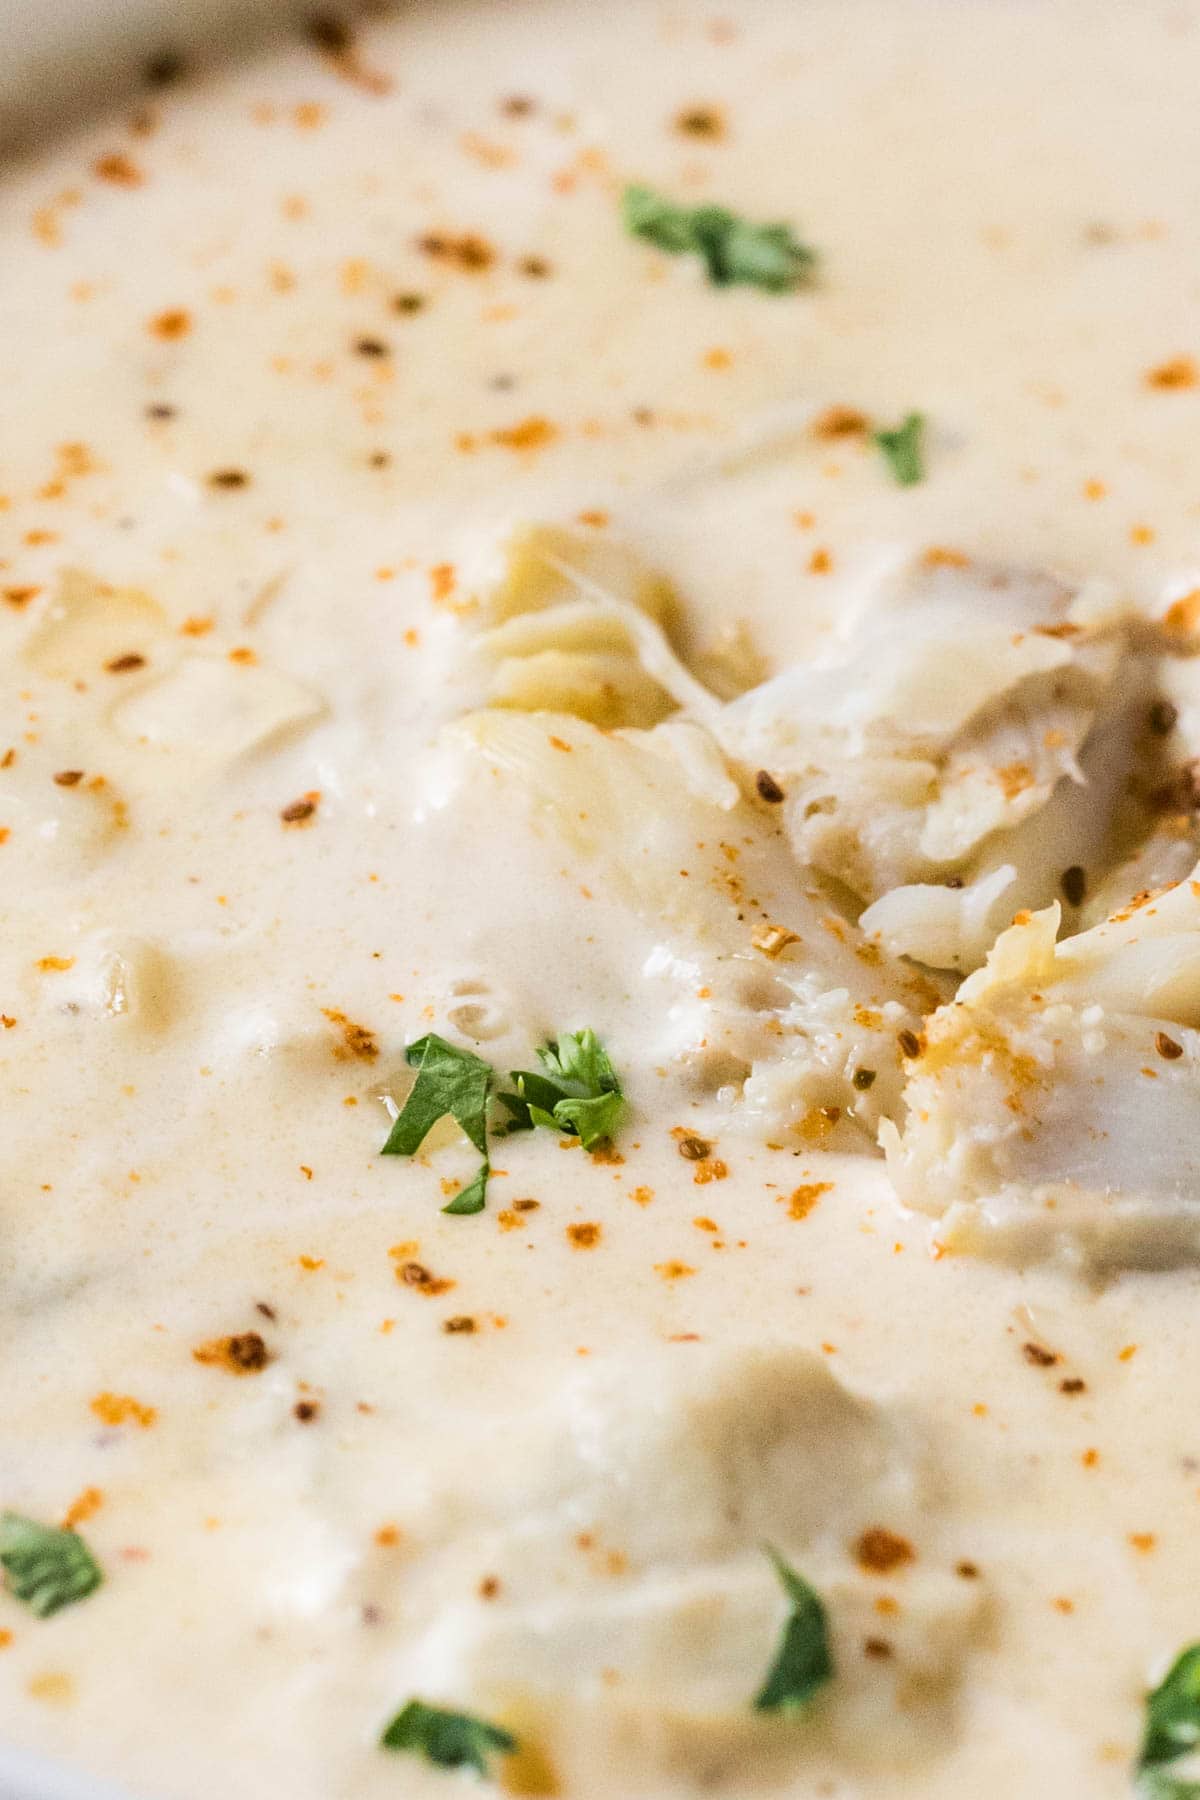 Close-up view of lump crab meat in a cream based soup.